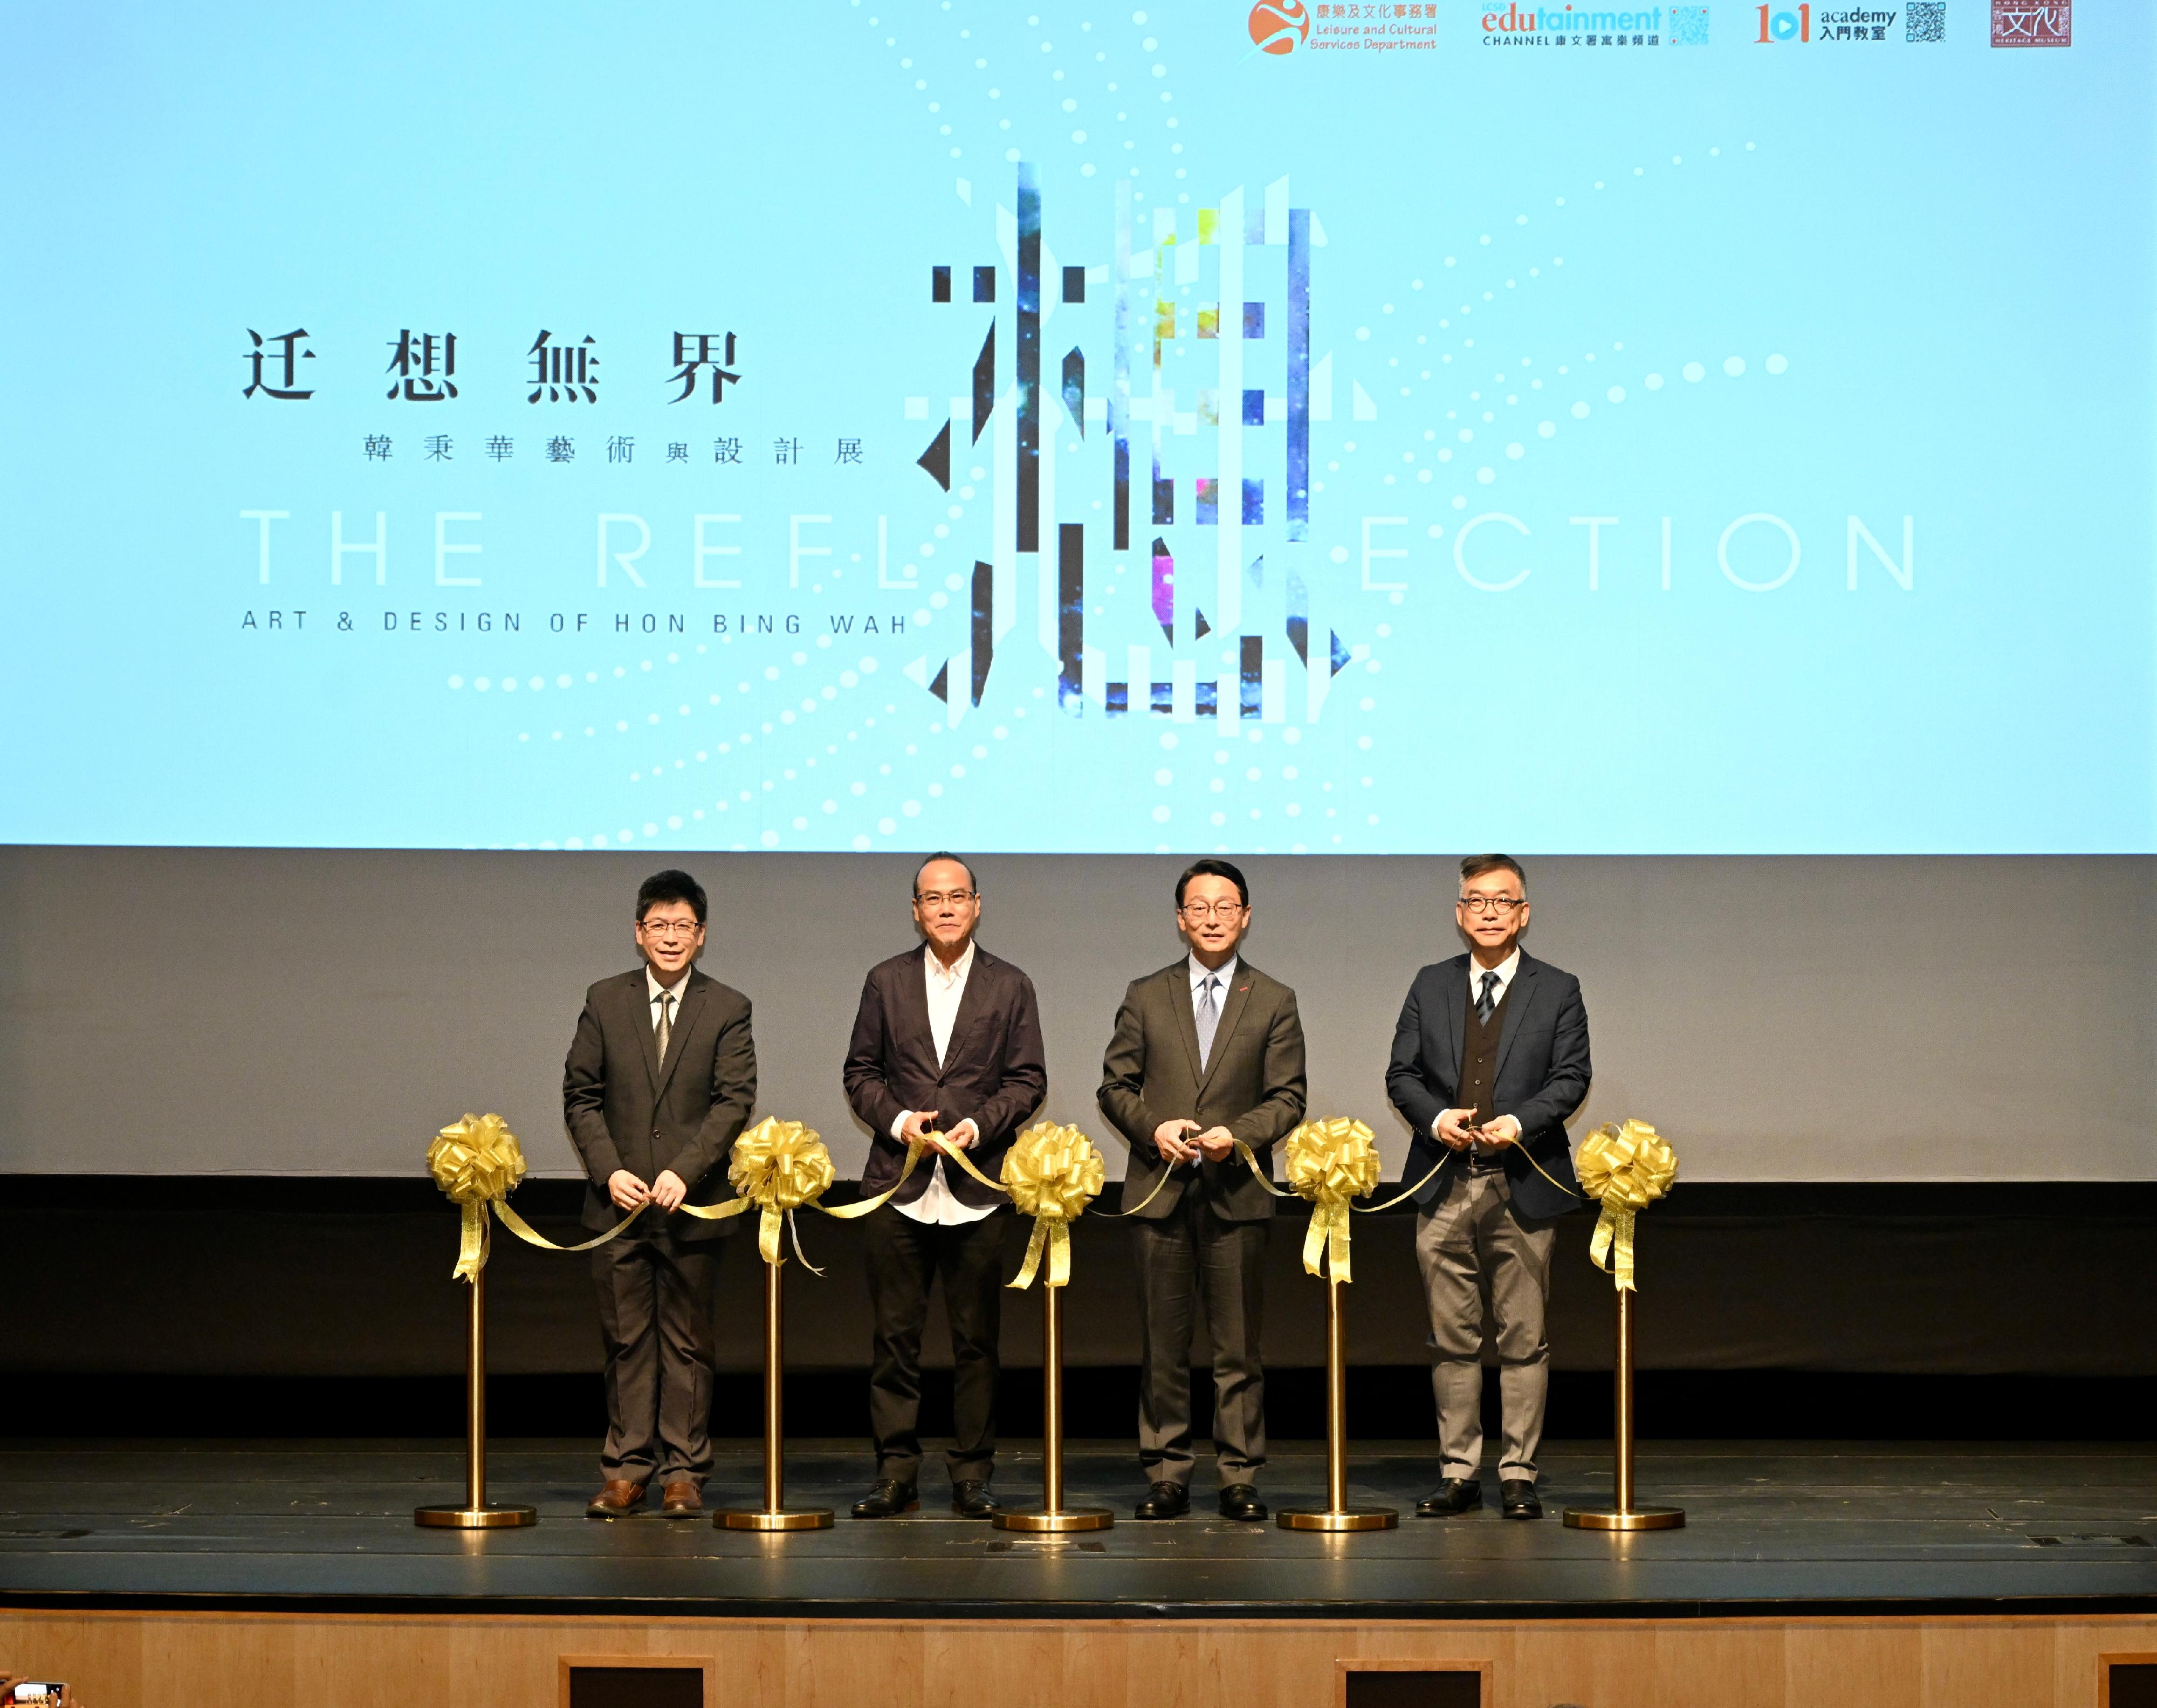 The opening ceremony for "The Reflection - Art & Design of Hon Bing-wah" exhibition was held today (November 14) at the Hong Kong Heritage Museum (HKHM). Photo shows officiating guests (from left) the Acting Museum Director of the HKHM, Dr Raymond Tang; designer and artist Professor Hon Bing-wah; the Director of Leisure and Cultural Services, Mr Vincent Liu; and the Chairman of the Art Sub-committee of the Museum Advisory Committee, Professor Desmond Hui, at the ceremony.